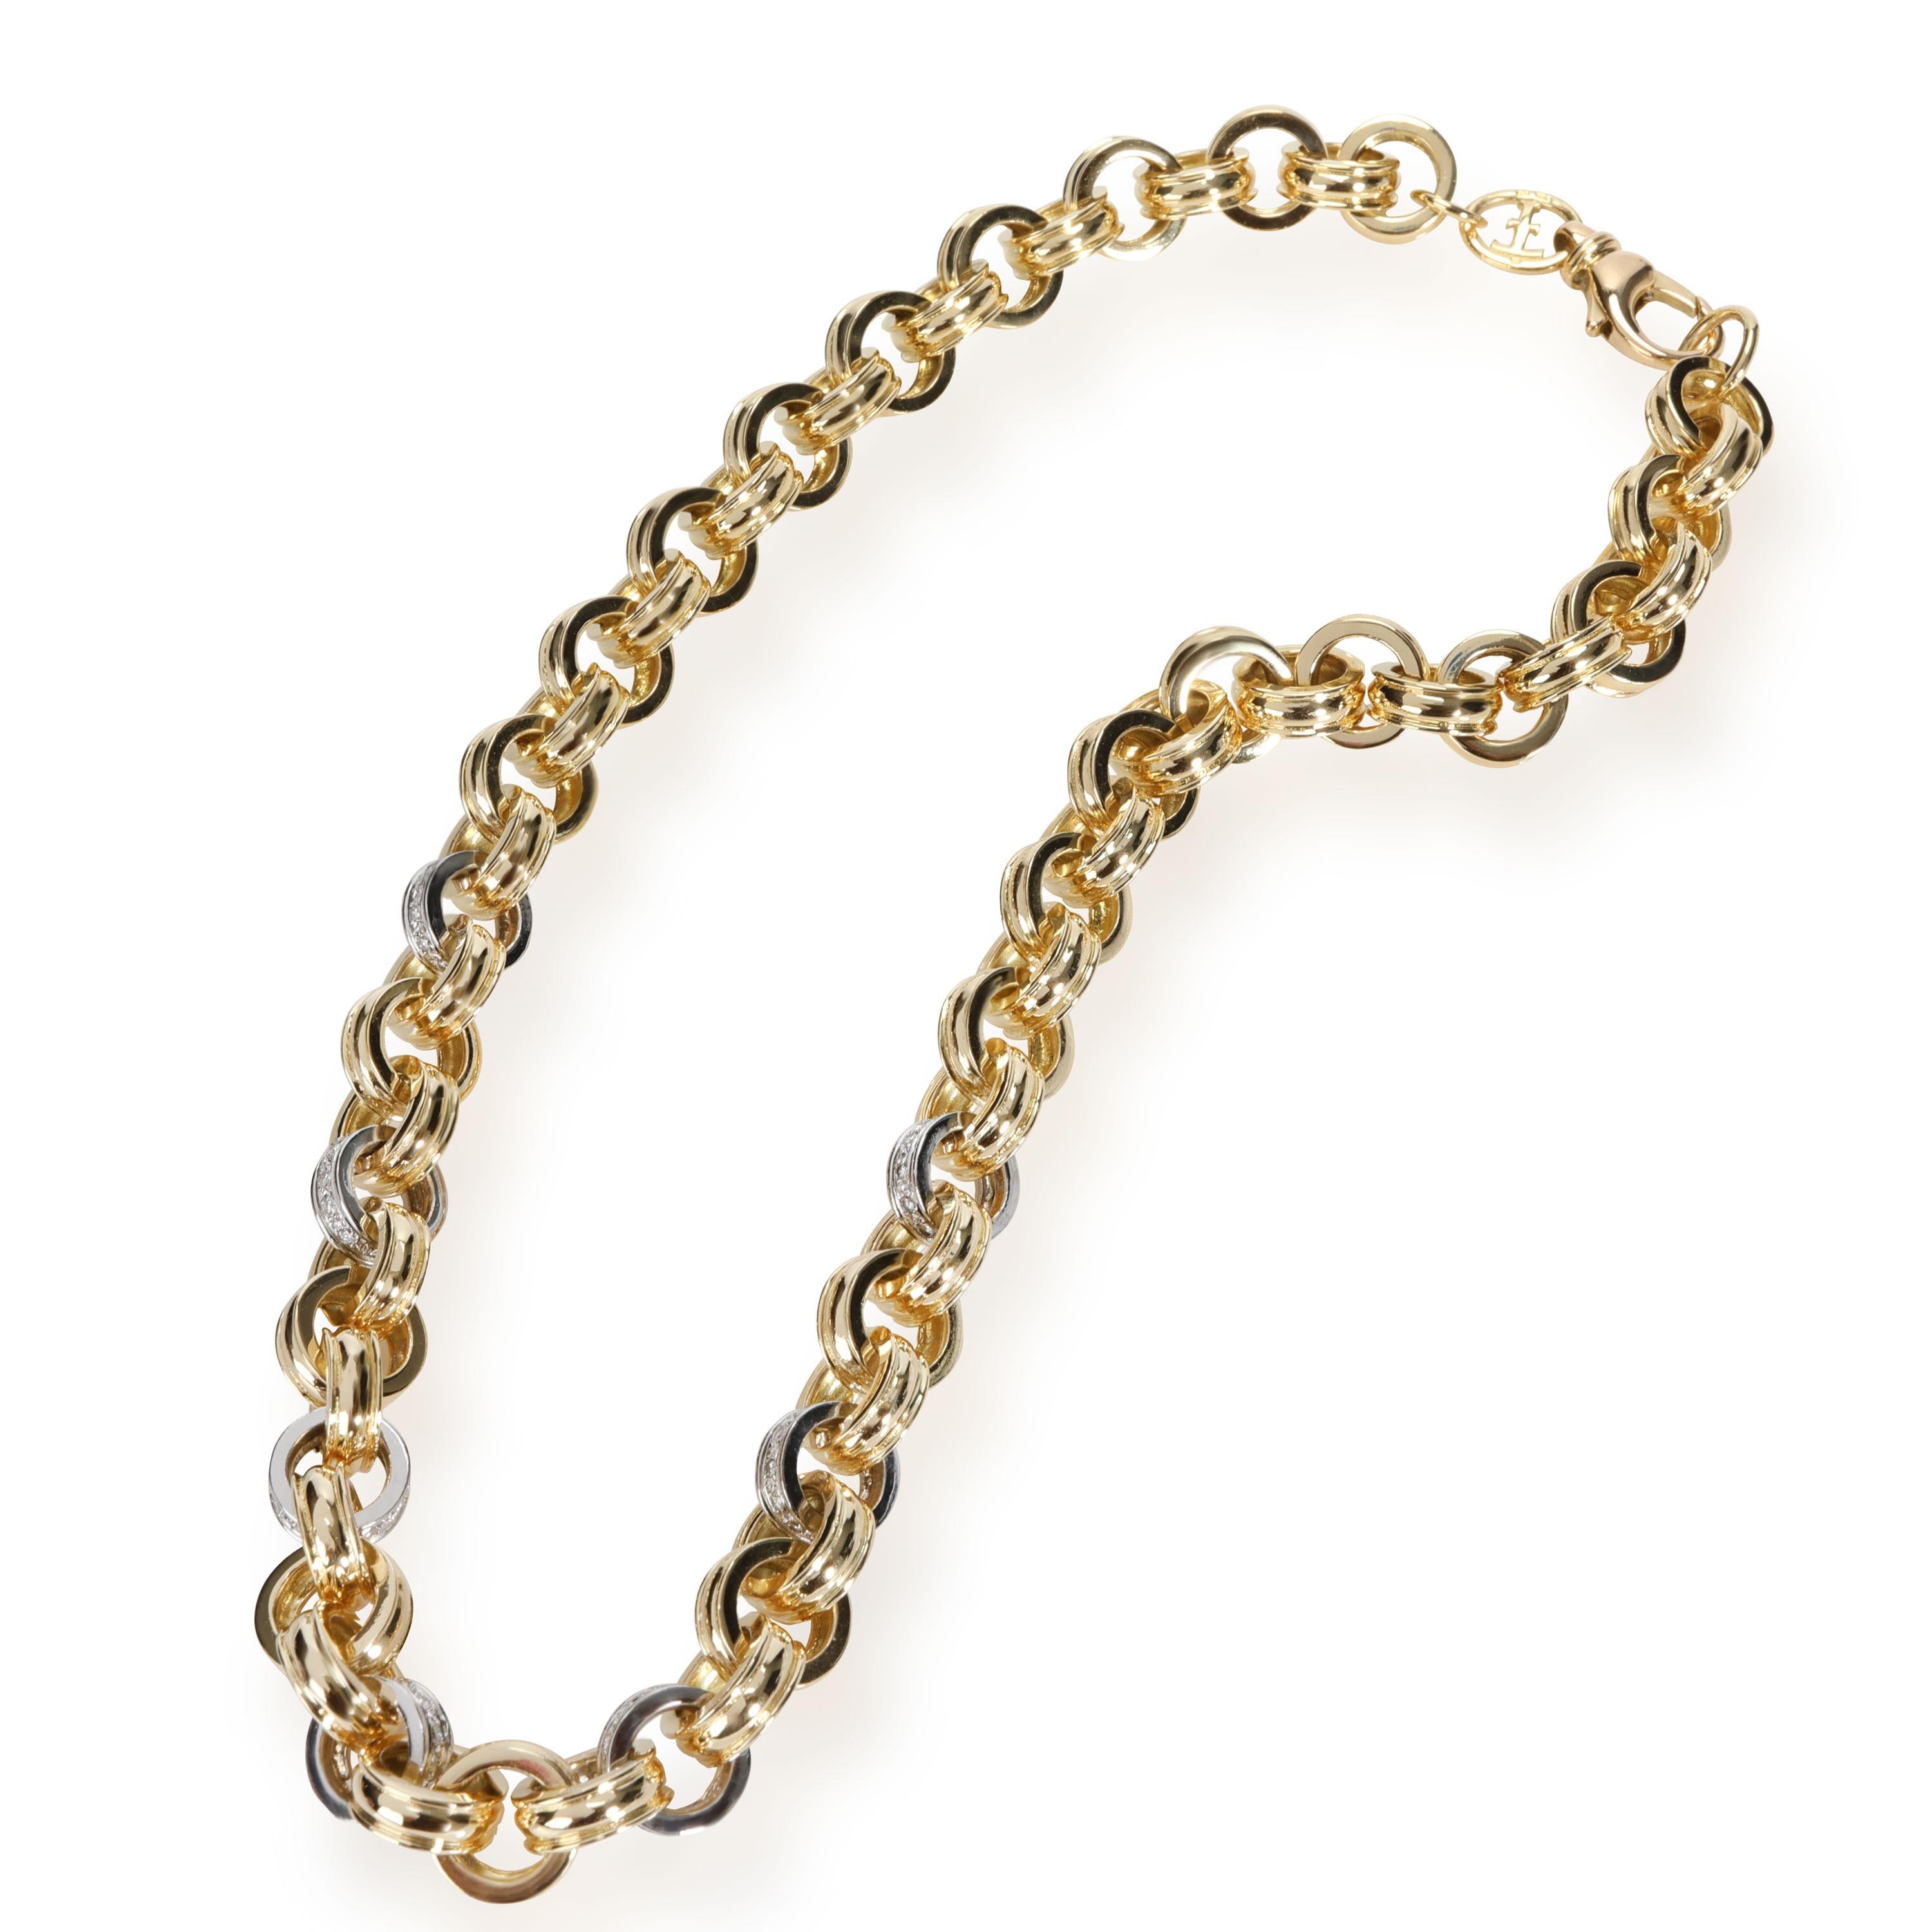 Theo Fennell Diamond Link Necklace in 18K 2 Tone Gold 2.52 CTW

PRIMARY DETAILS
SKU: 110353
Listing Title: Theo Fennell Diamond Link Necklace in 18K 2 Tone Gold 2.52 CTW
Condition Description: Retails for 29,000 USD. In excellent condition and